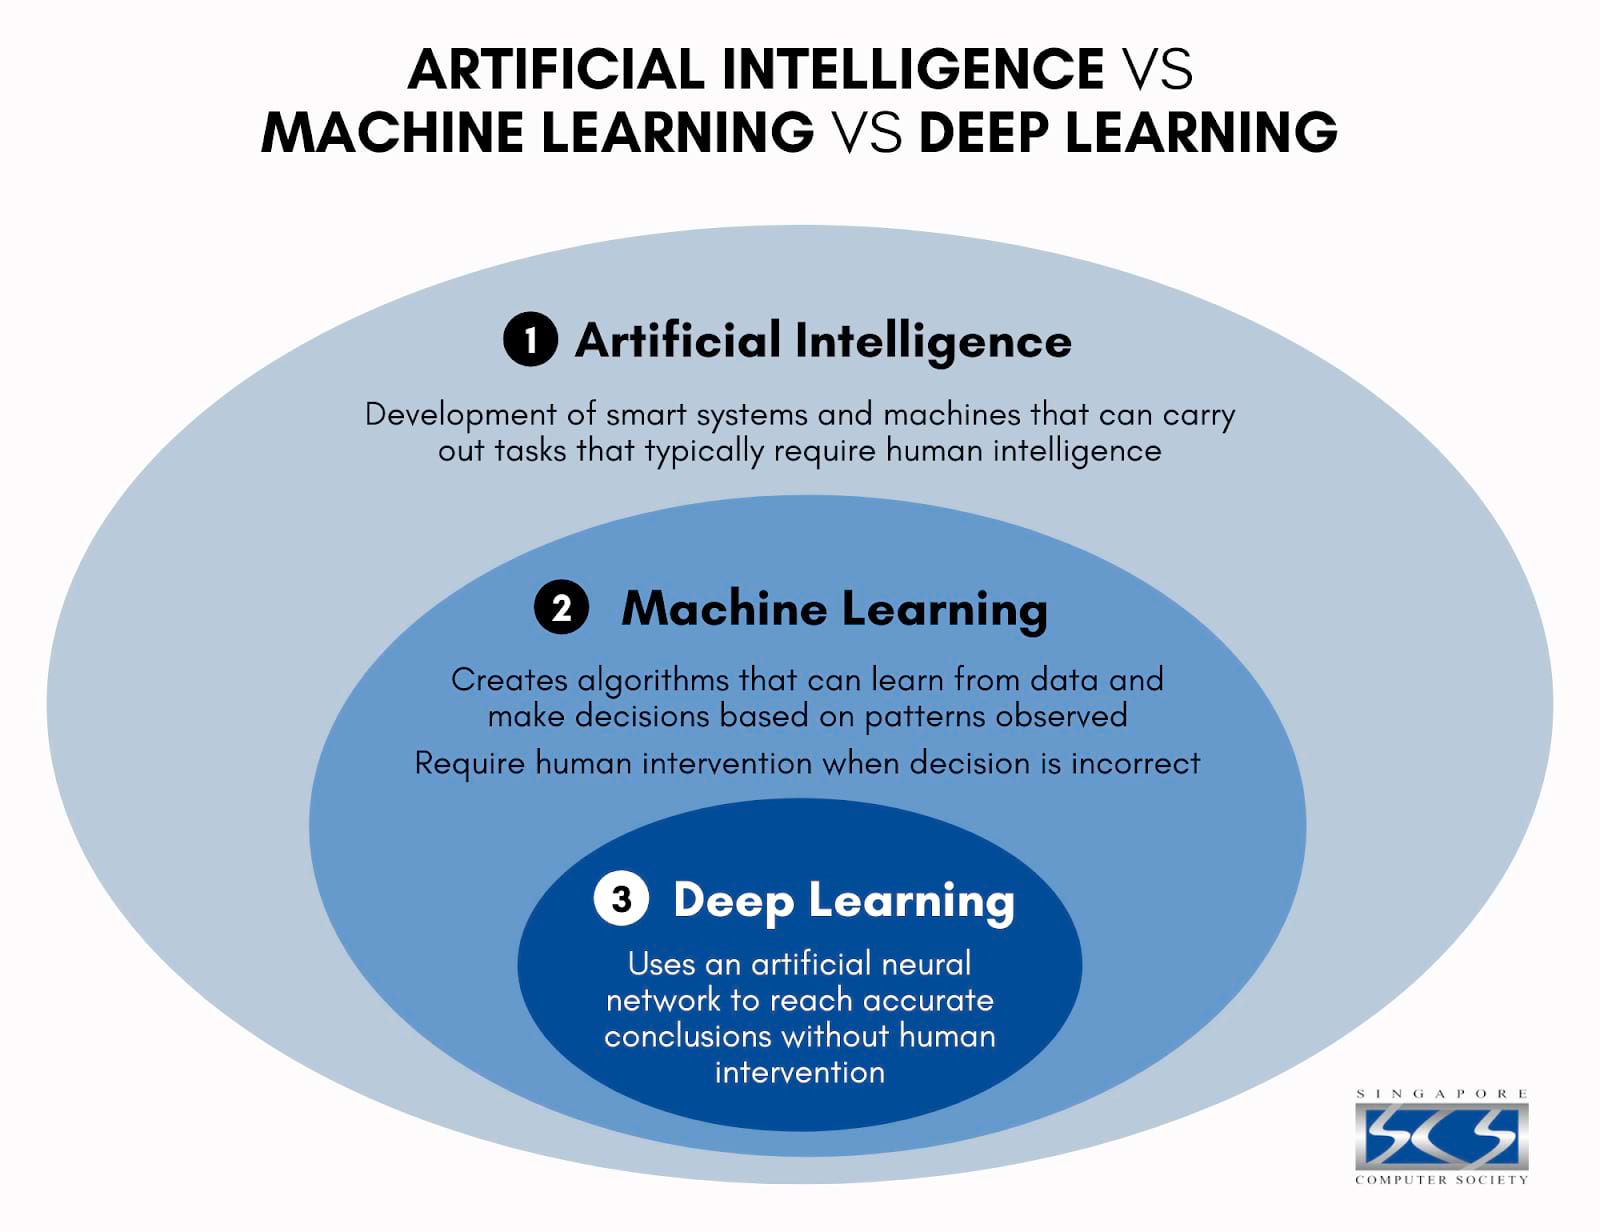 An infographic on Artificial Intelligence vs. Machine Learning vs. Deep Learning